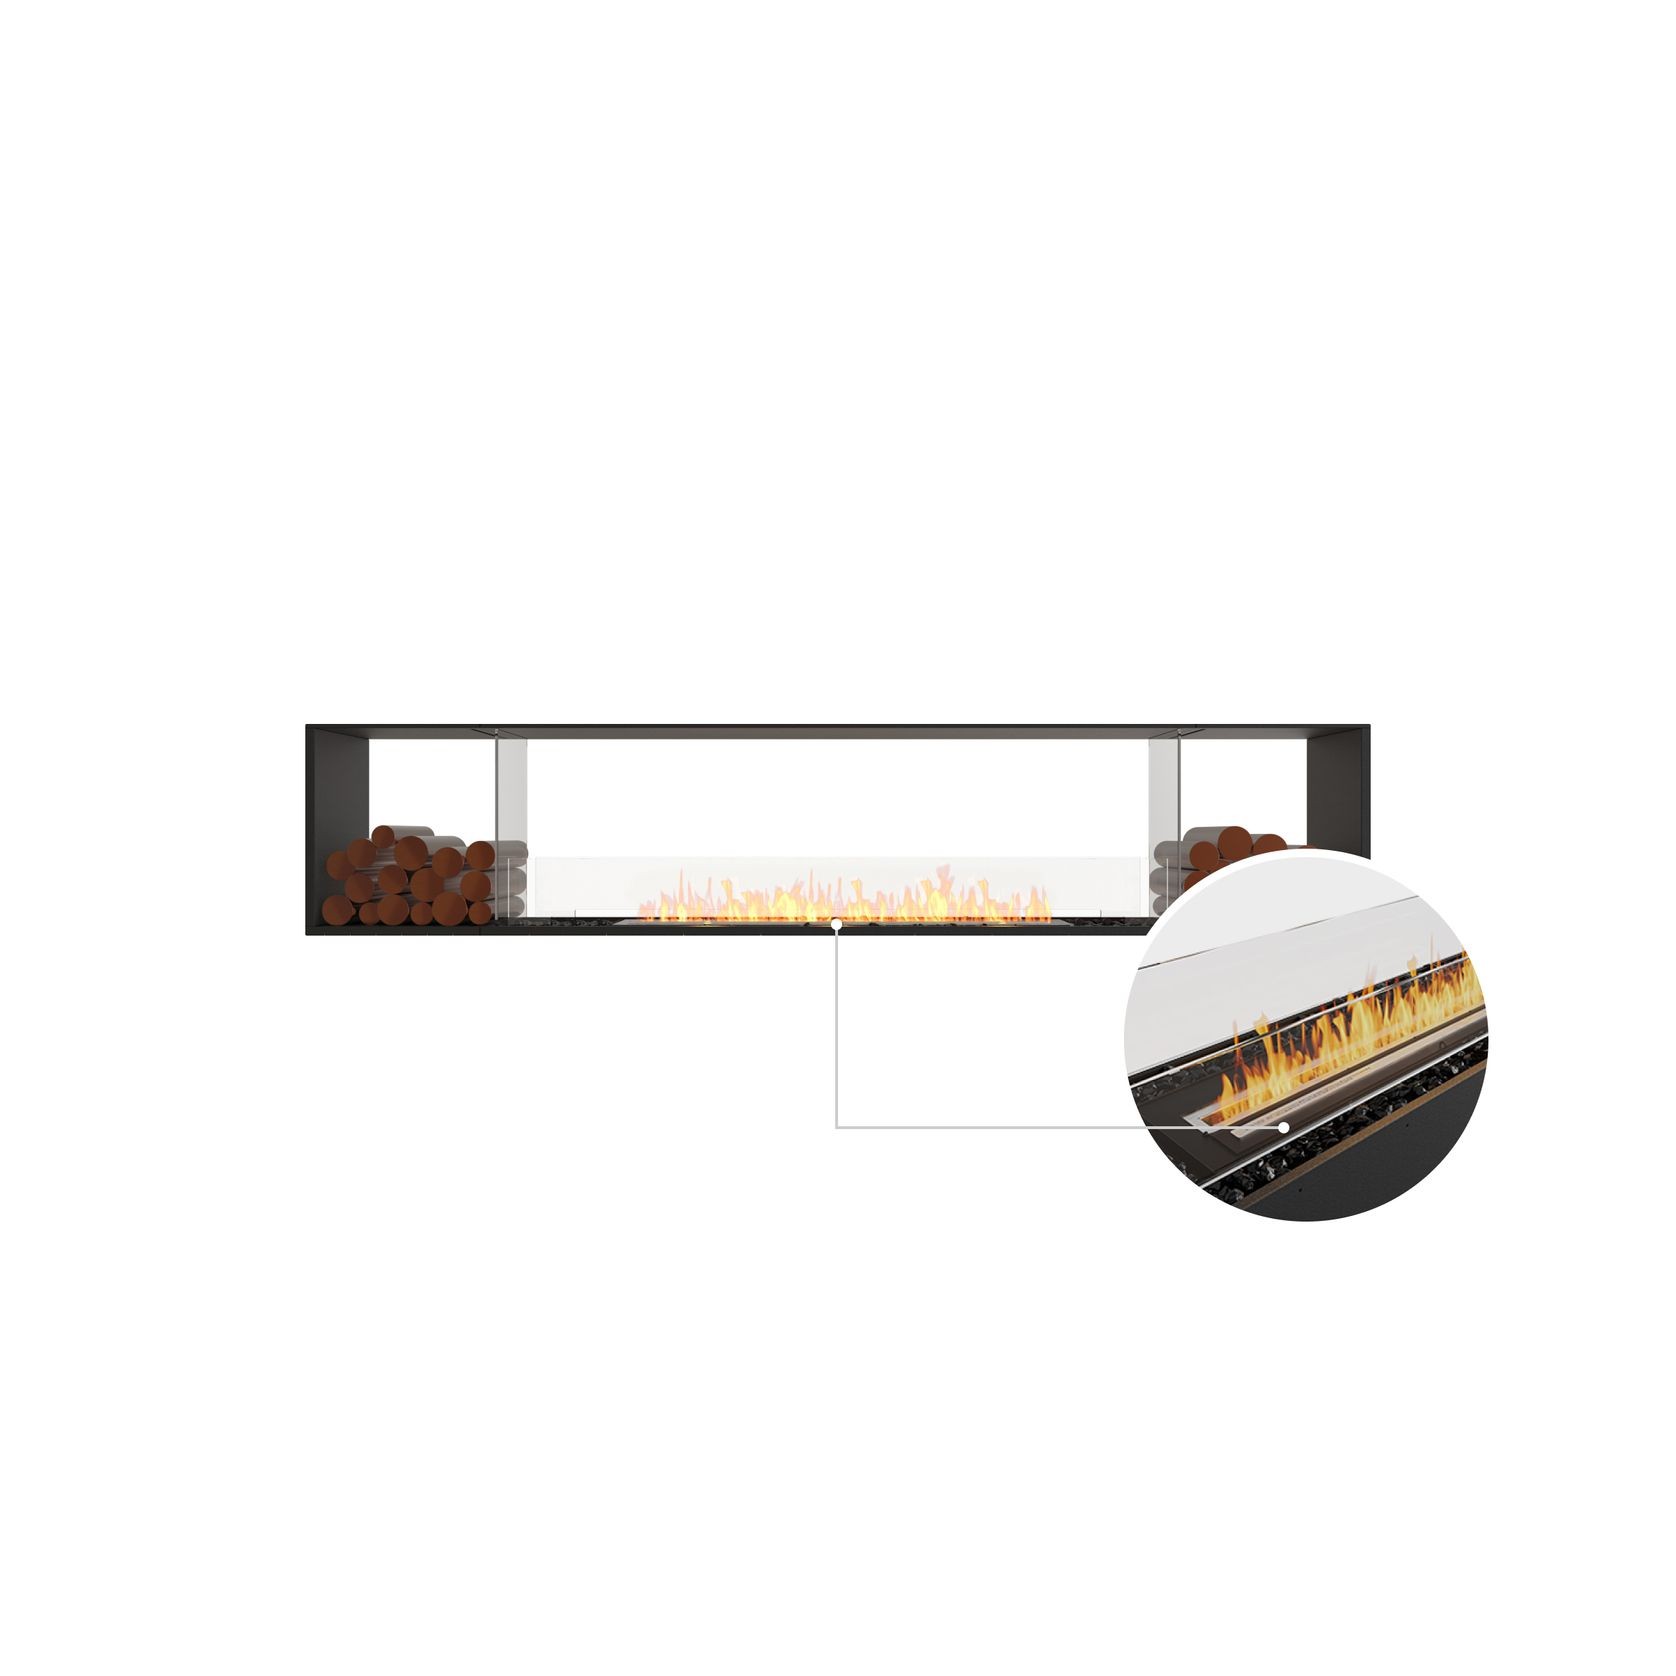 EcoSmart™ Flex 104DB.BX2 Double-Sided Fireplace Insert gallery detail image